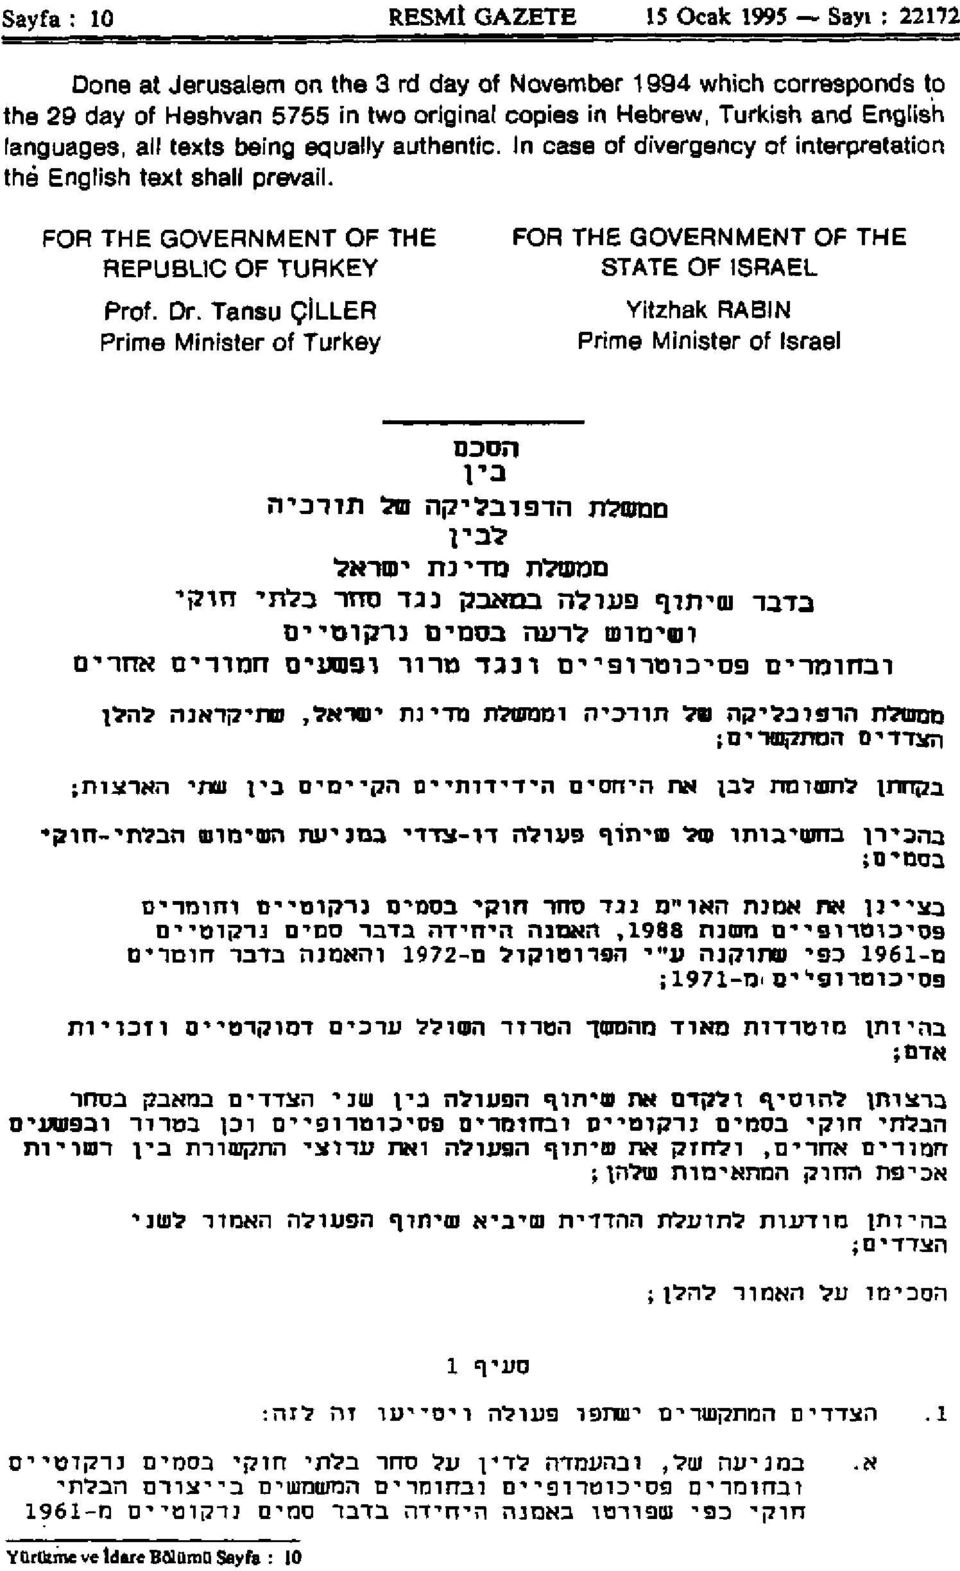 Tansu ÇİLLER Prime Minister of Turkey FOR THE GOVERNMENT OF THE STATE OF ISRAEL Yitzhak RABIN Prime Minister of Israel SDSDSDSA ASASASAS SSSSA ASASASASASASASASASASASASAASASASASAA XZXZXZXZ